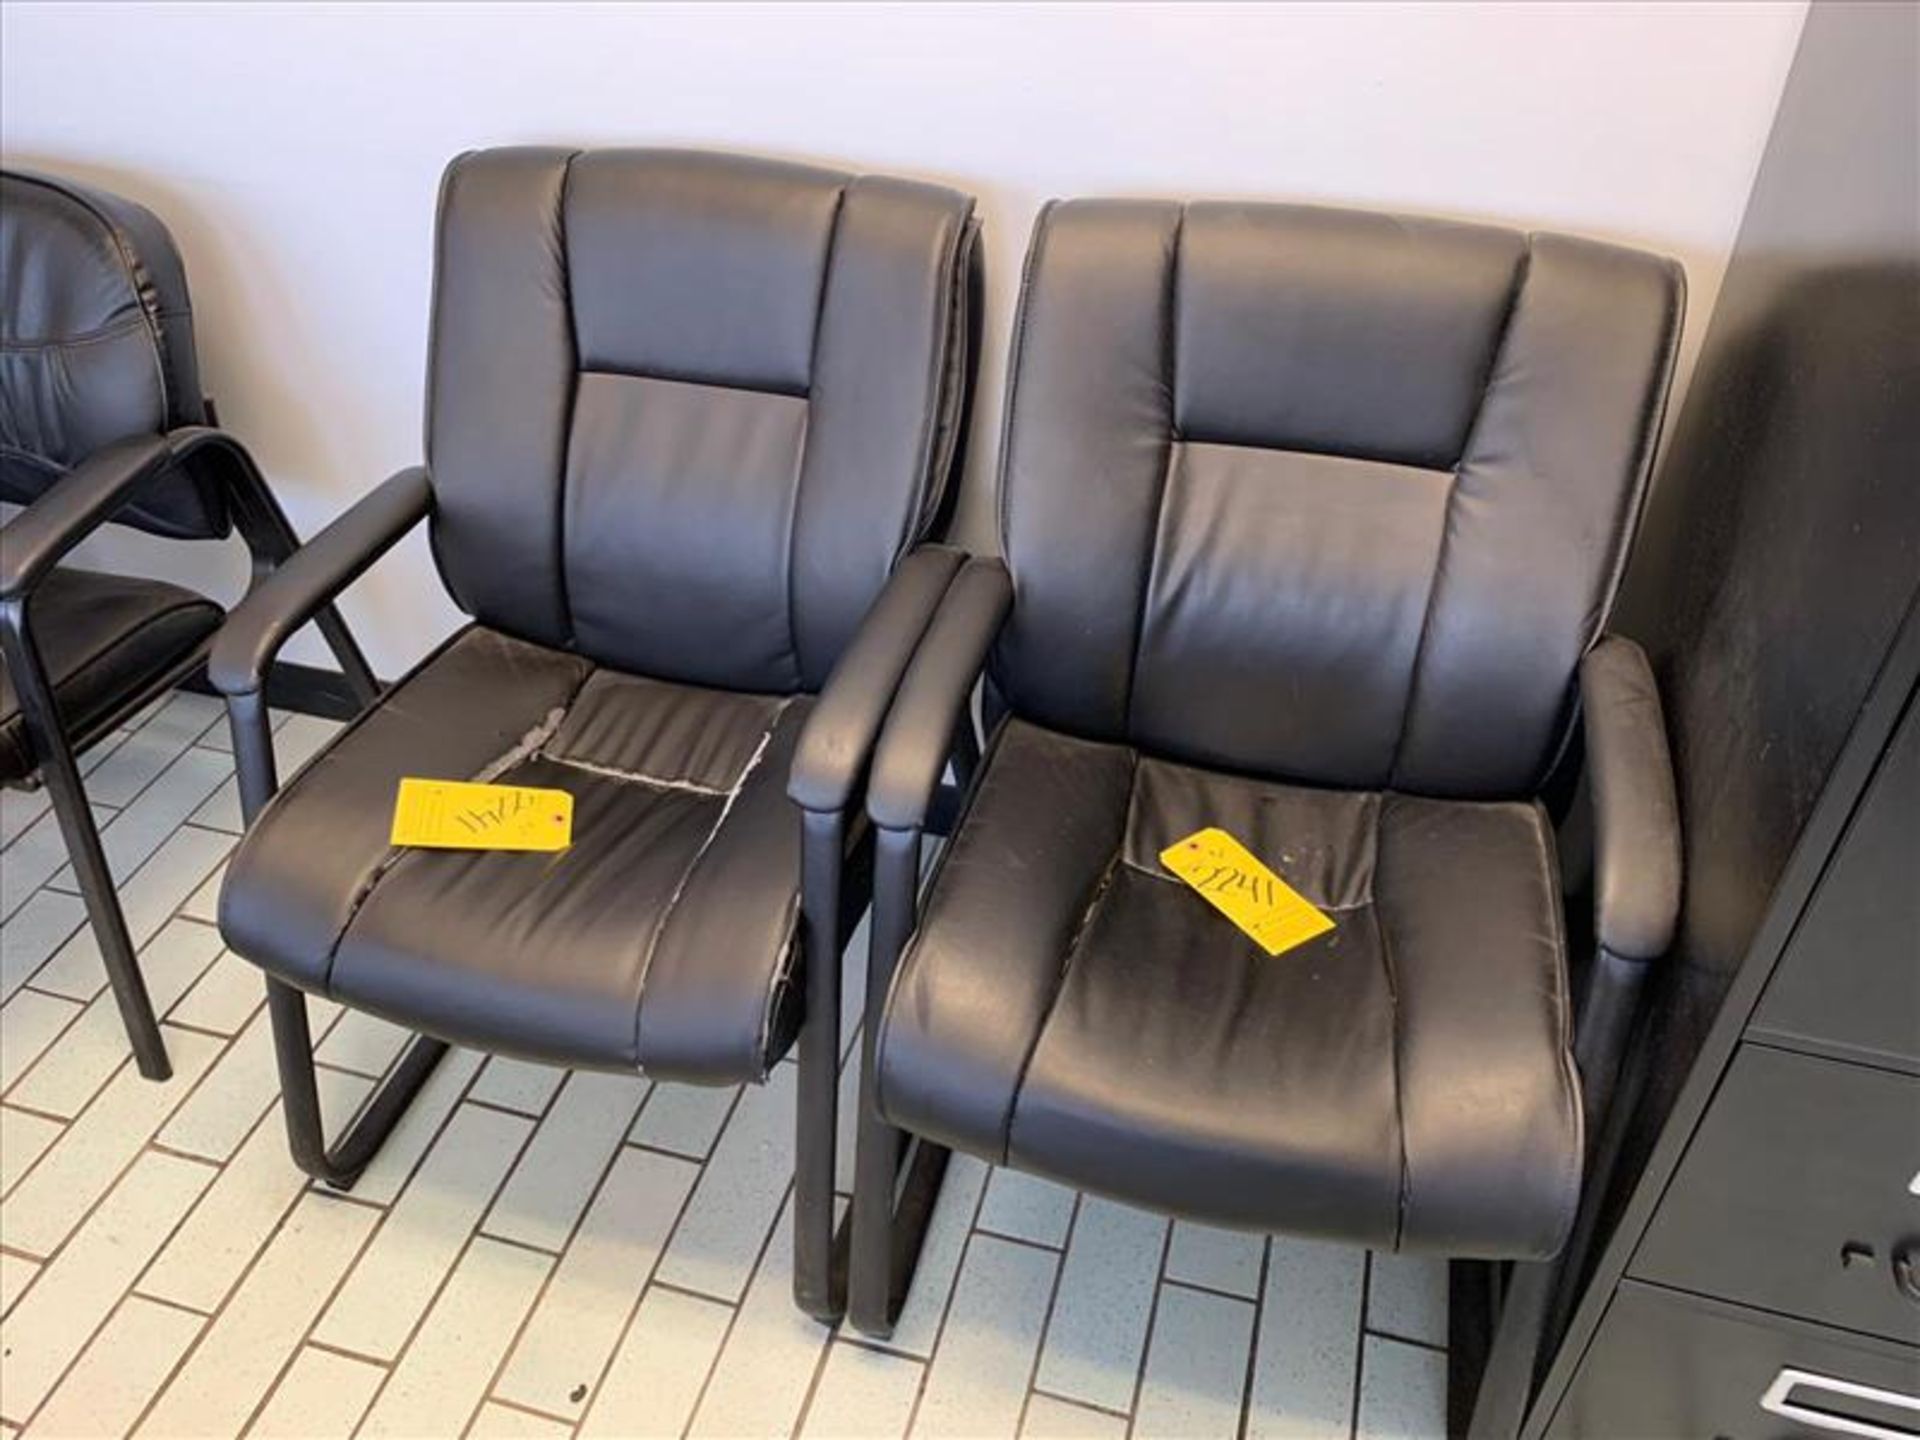 (2) Black leather office chairs with arm rests (HR Manager's Office -Kimberly) [100 Ethel Avenue]